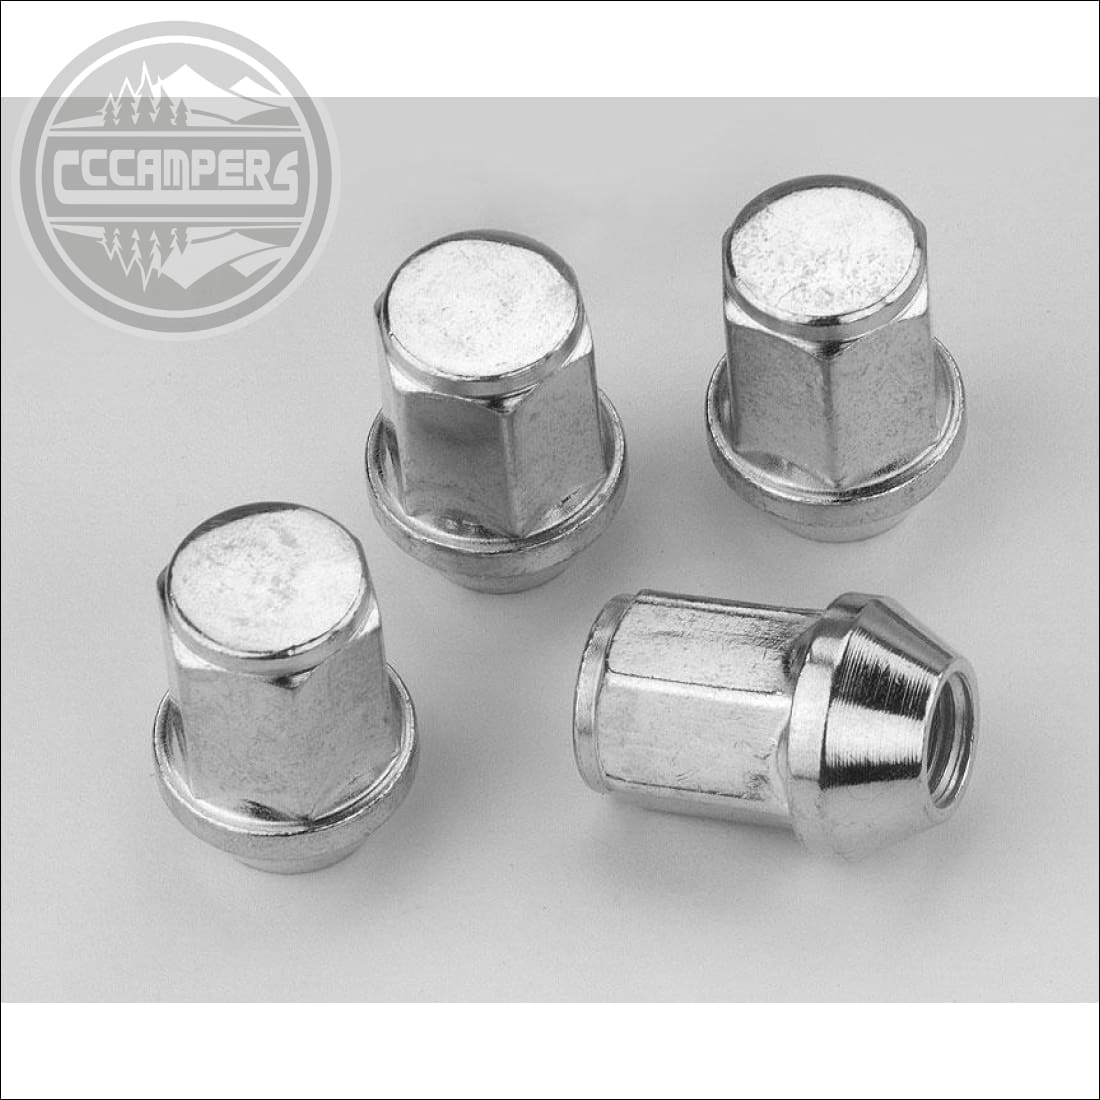 Wolfrace premium Locking Bolts/Nuts extra wheel security - cccampers.myshopify.com